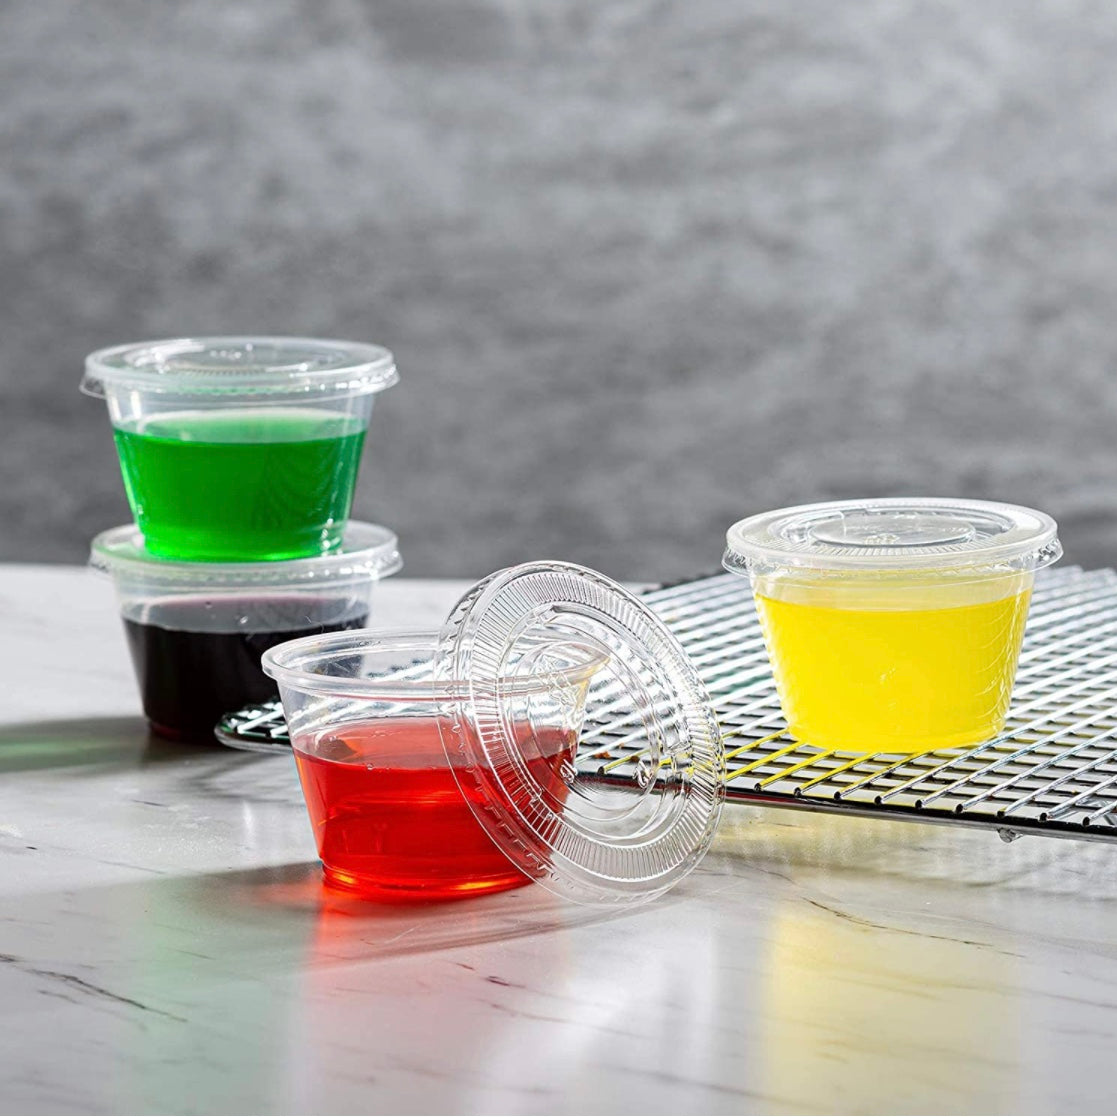 (4 oz. 100 Sets) Disposable Plastic Portion Cups with Lids, Condiment Cup,  Souffle Portion, Sampling Cup Clear Cups